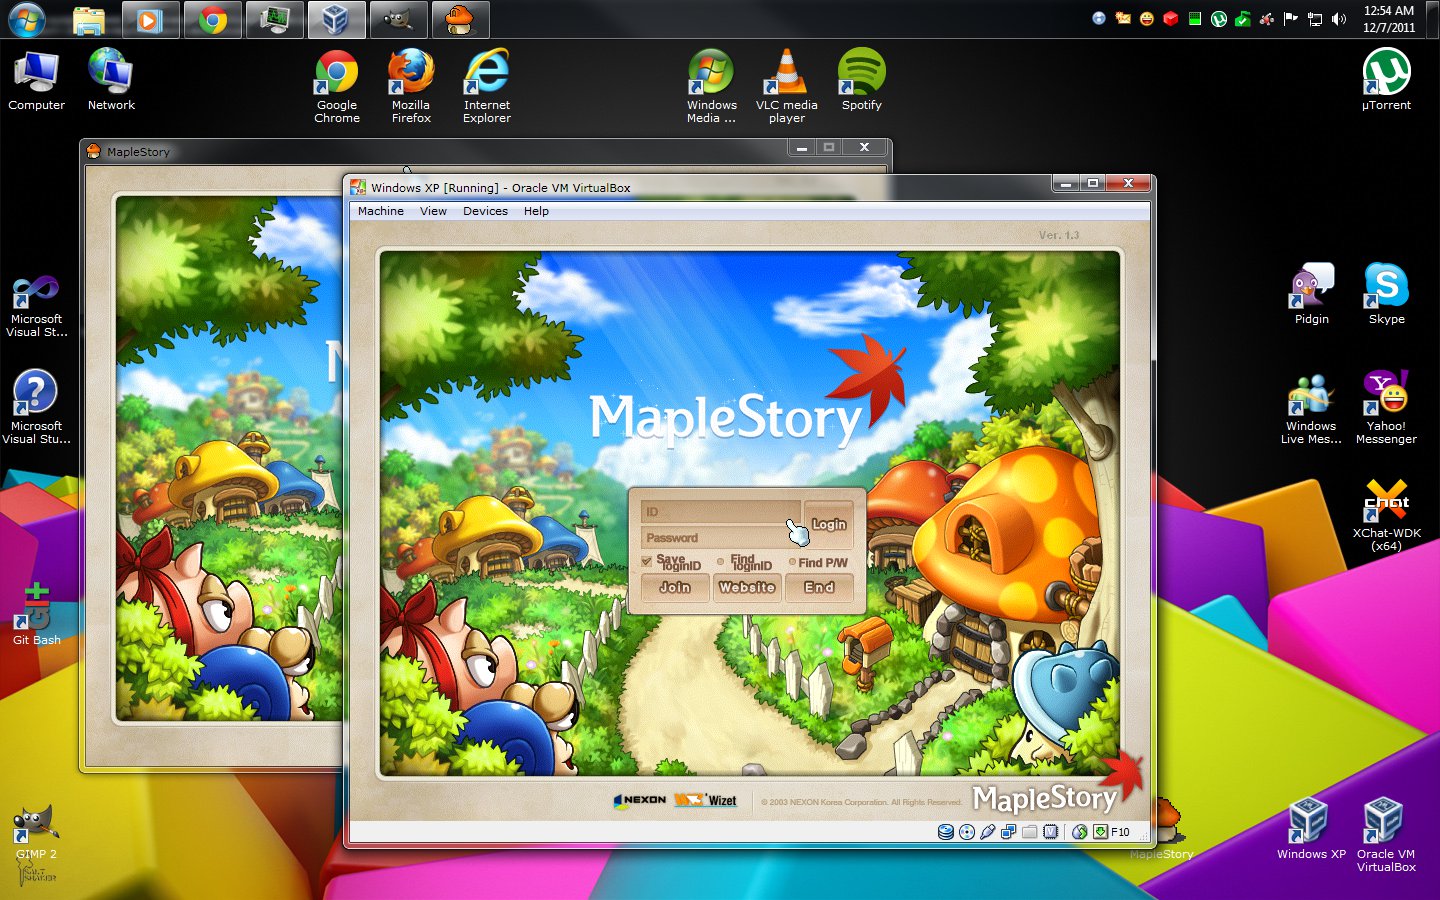 How to download maplestory